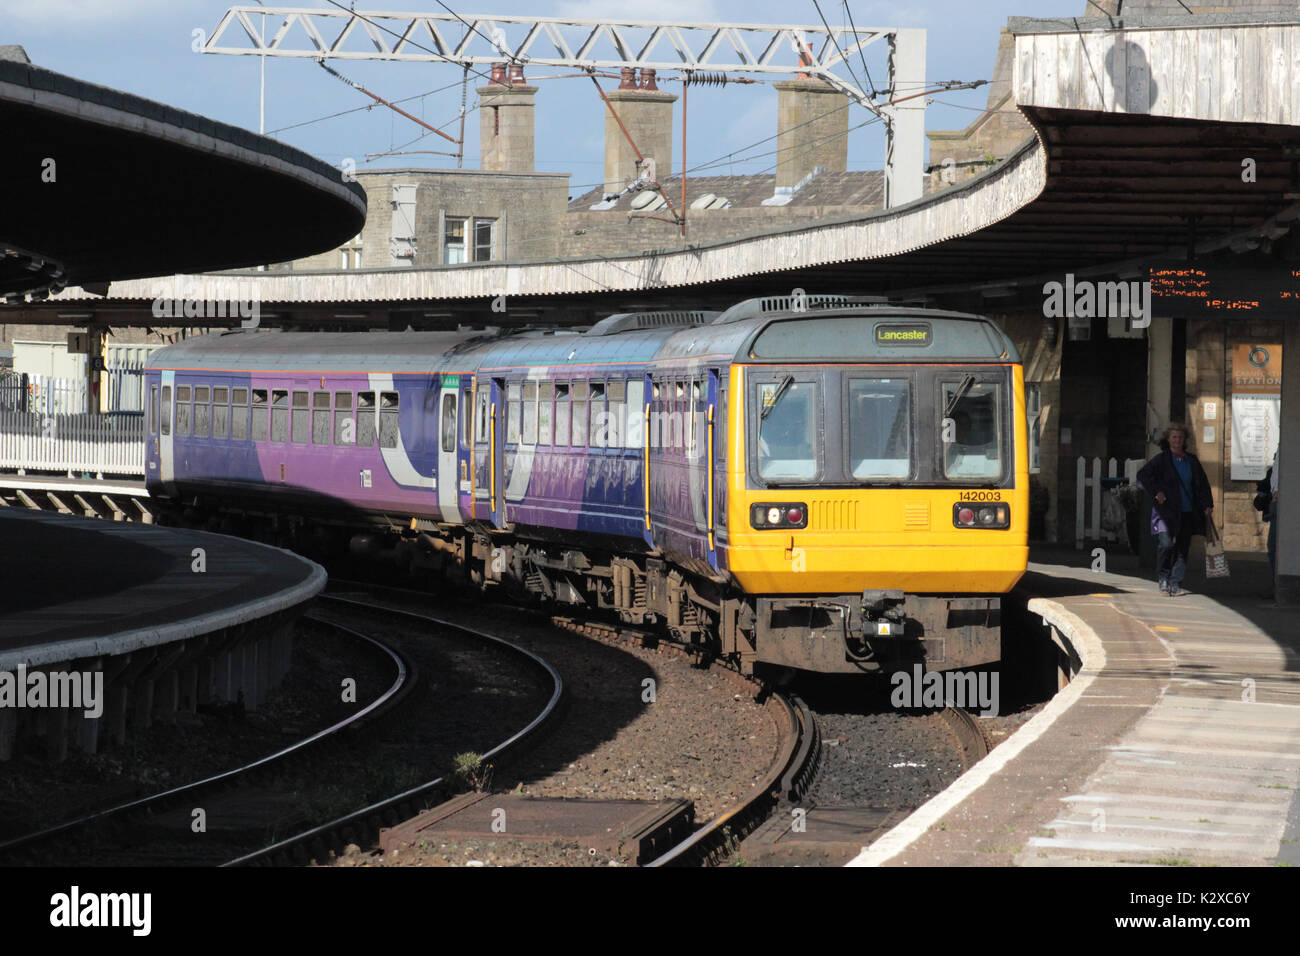 Class 142 Pacer diesel multiple unit with class 153 super sprinter passenger train in Carnforth railway station platform 1. Stock Photo